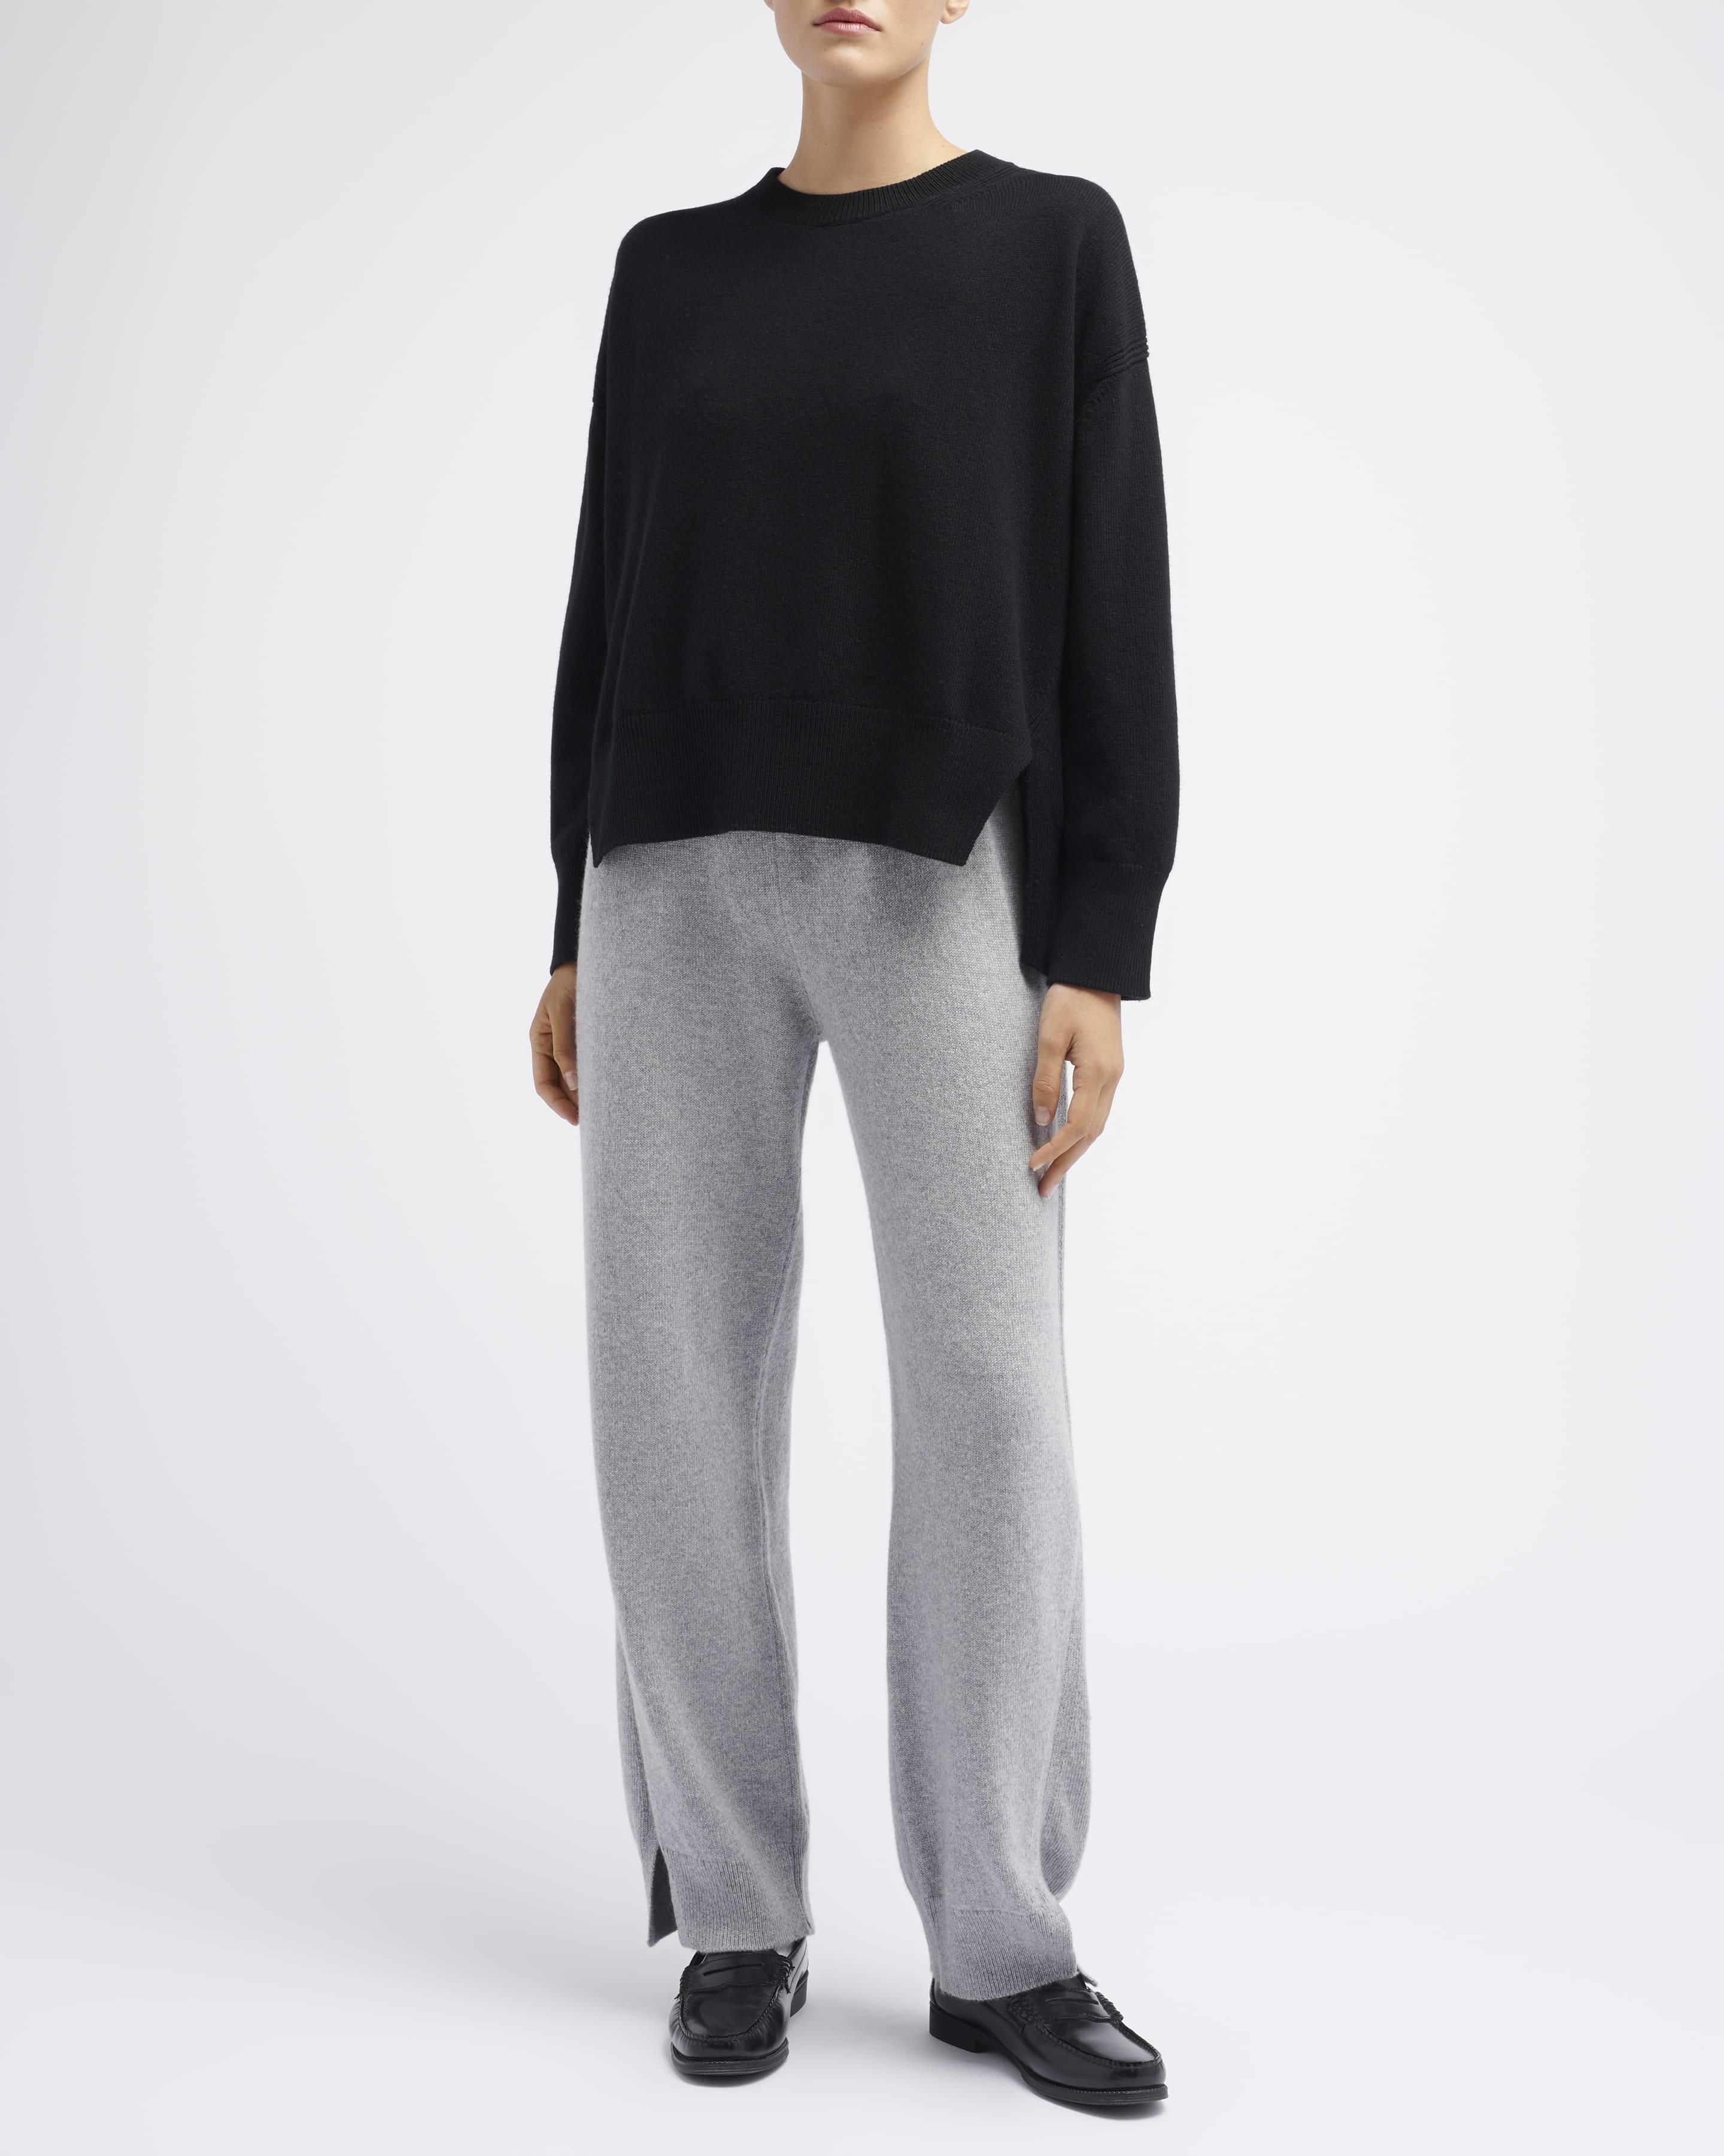 Barrie Iconic crew-neck cashmere jumper - Grey